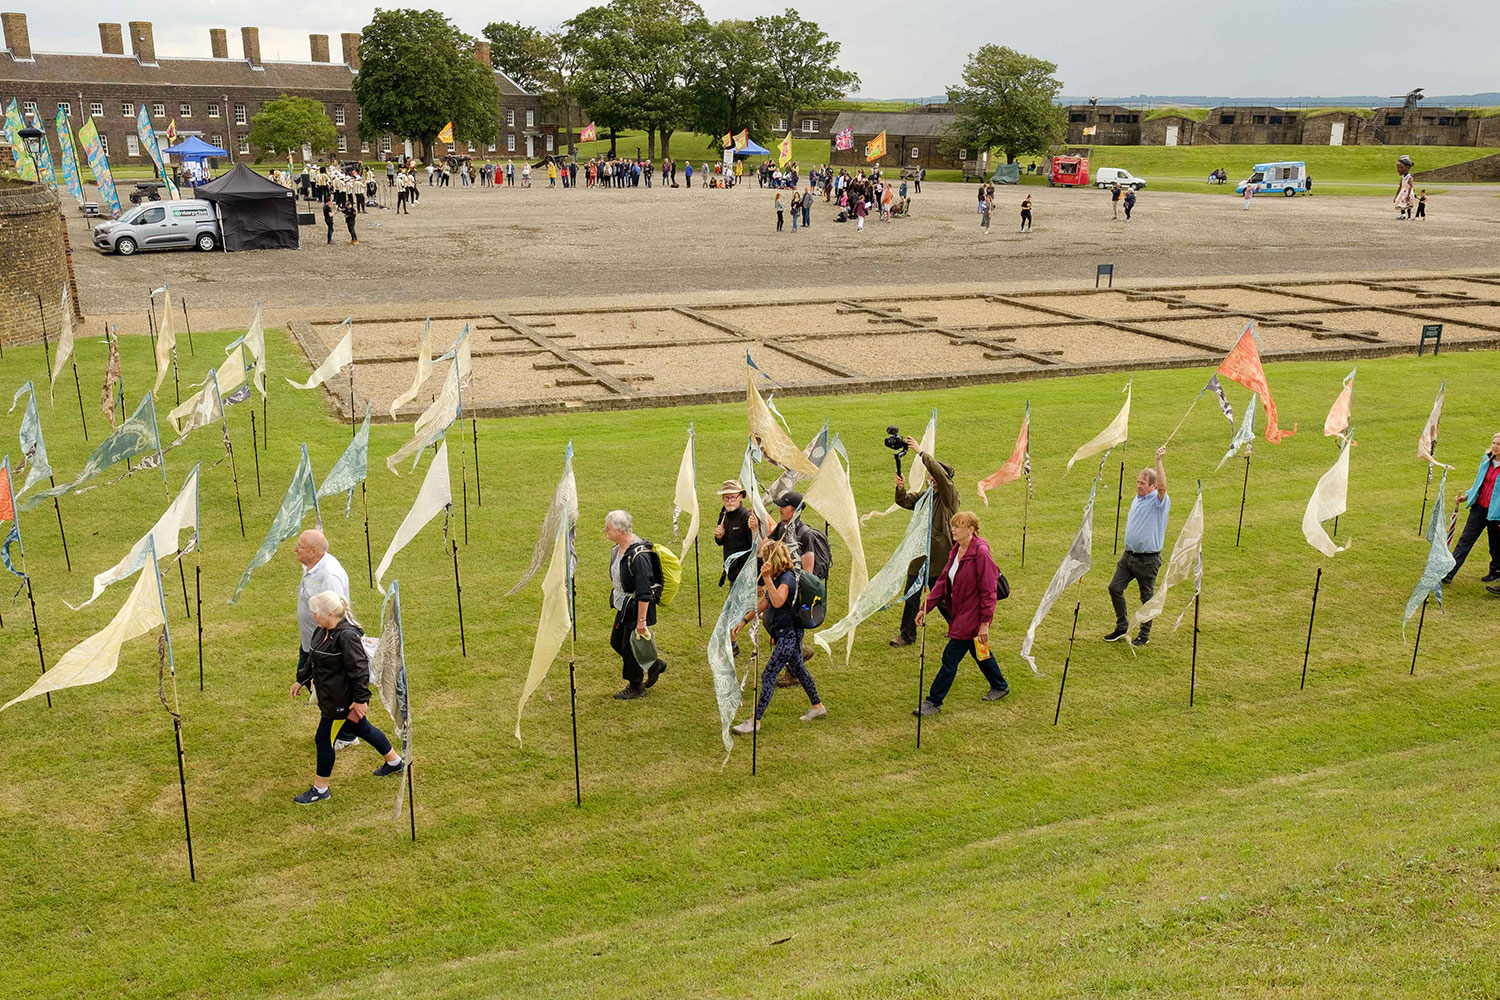 Wide shot of Tilbury Fort interior as a stream of walkers arrives through the Beach of Dreams flag installation